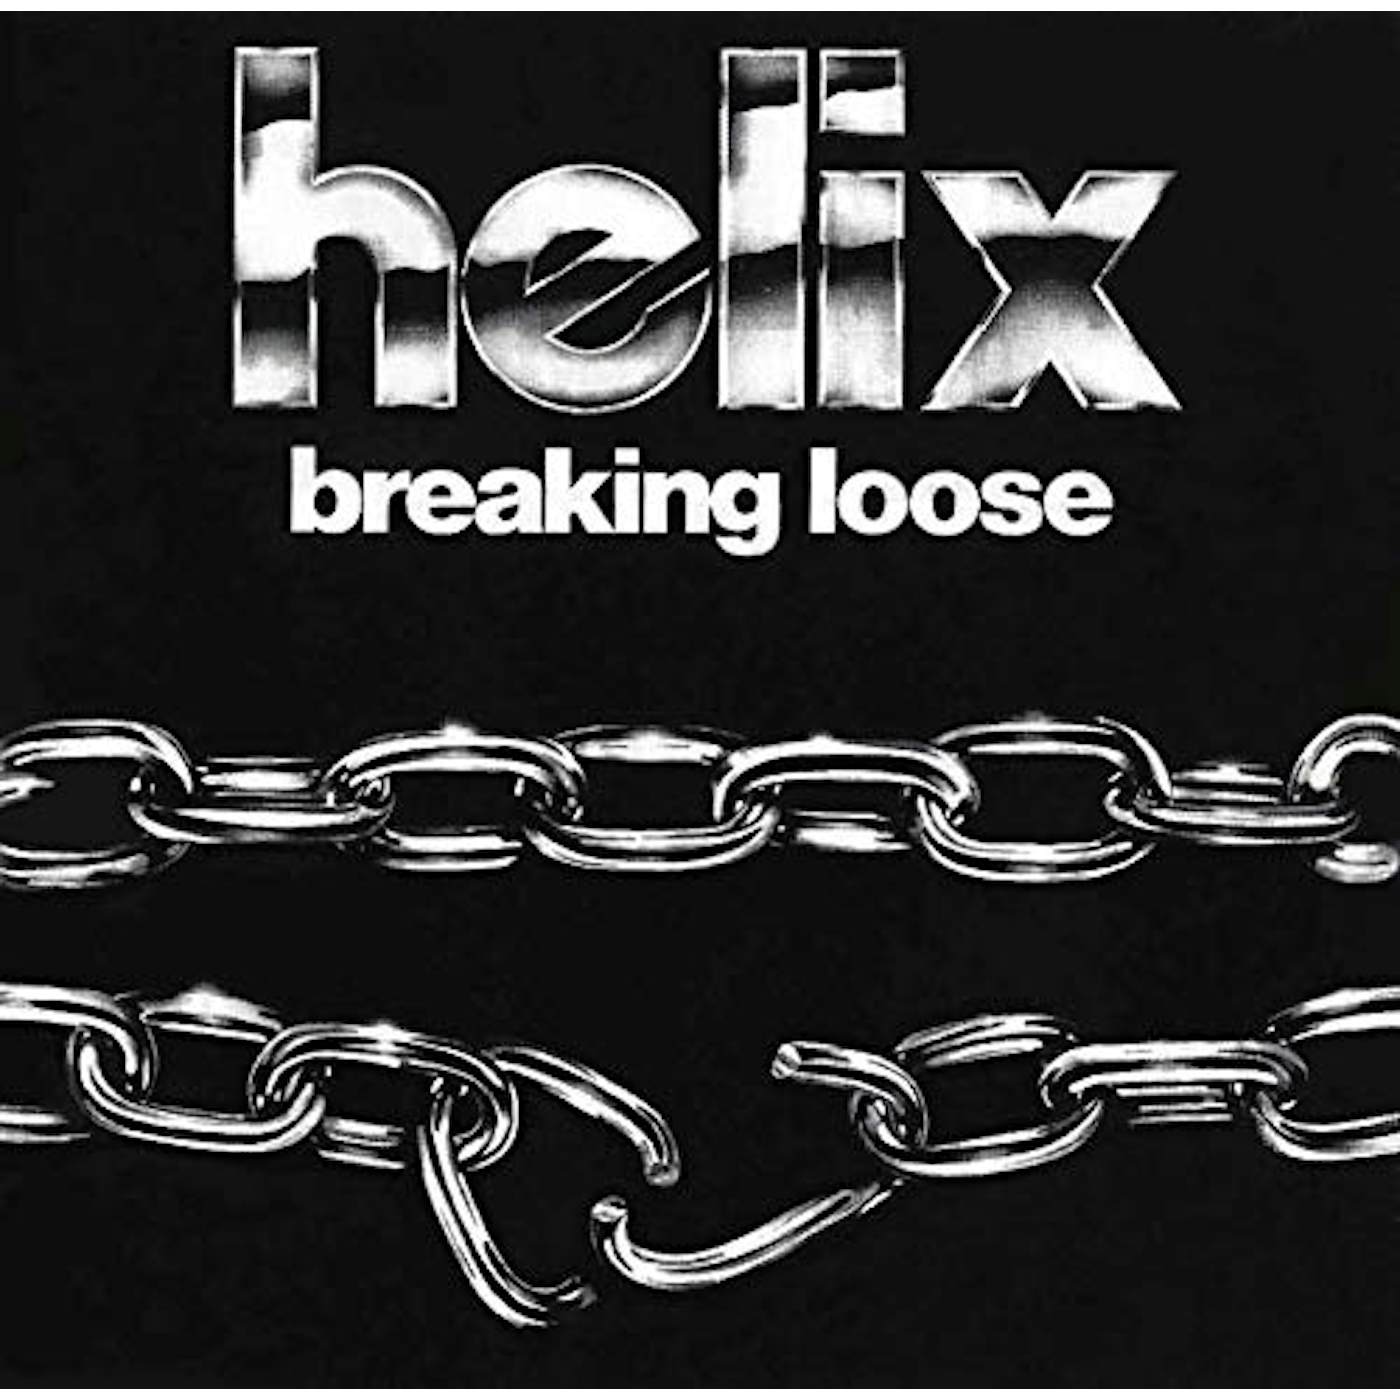 Helix BREAKING LOOSE - 40TH ANNIVERSARY EDITION CD